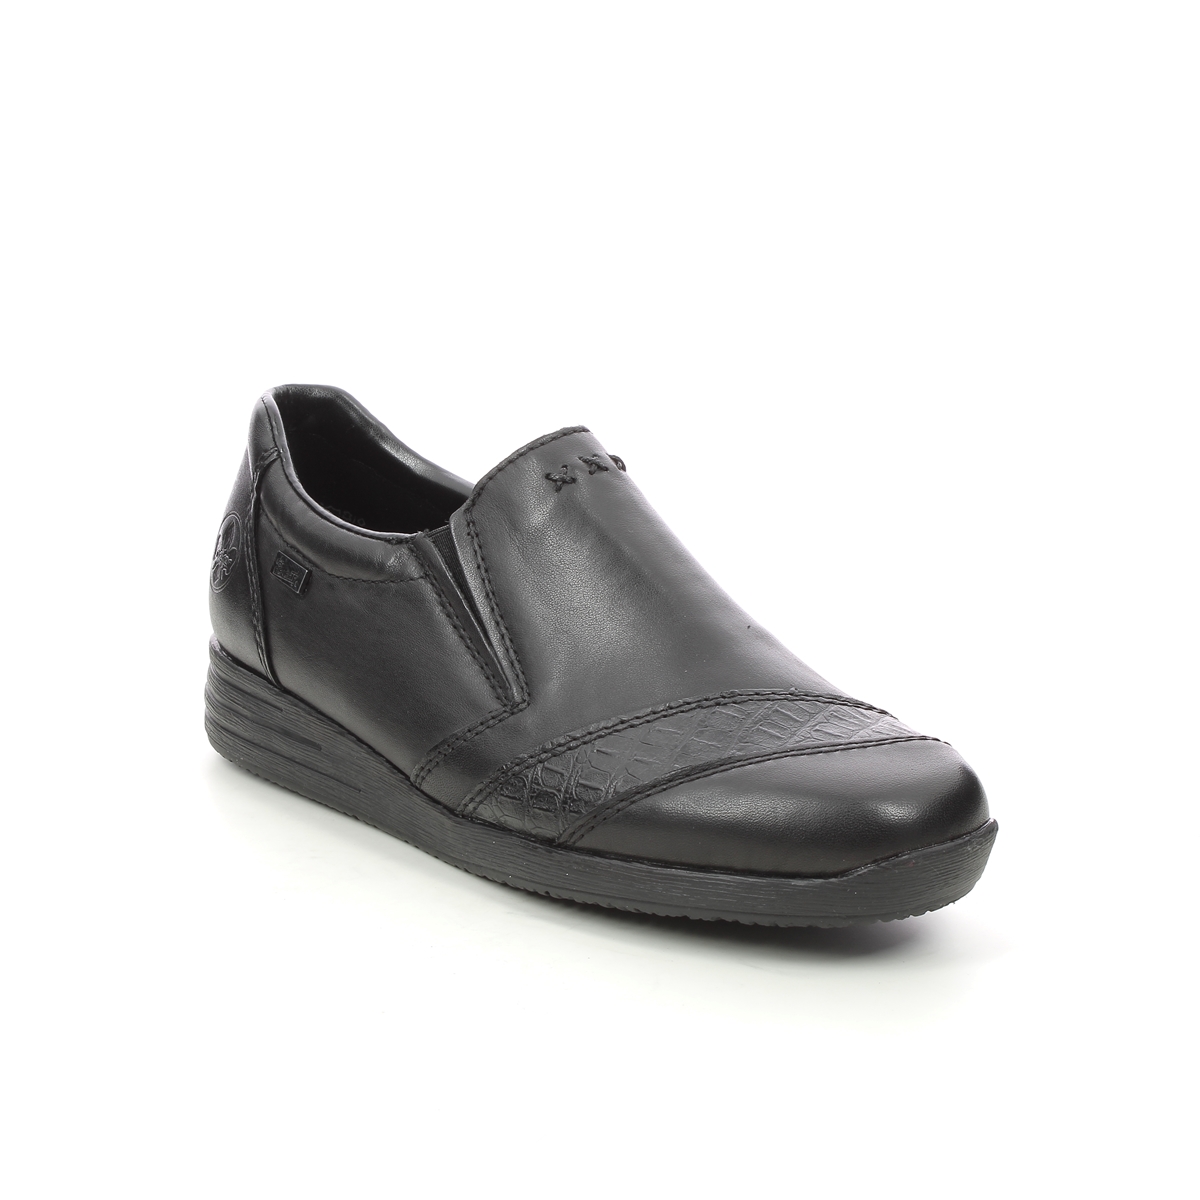 Rieker Bodica Tex Black Leather Womens Comfort Slip On Shoes 58462-00 In Size 40 In Plain Black Leather